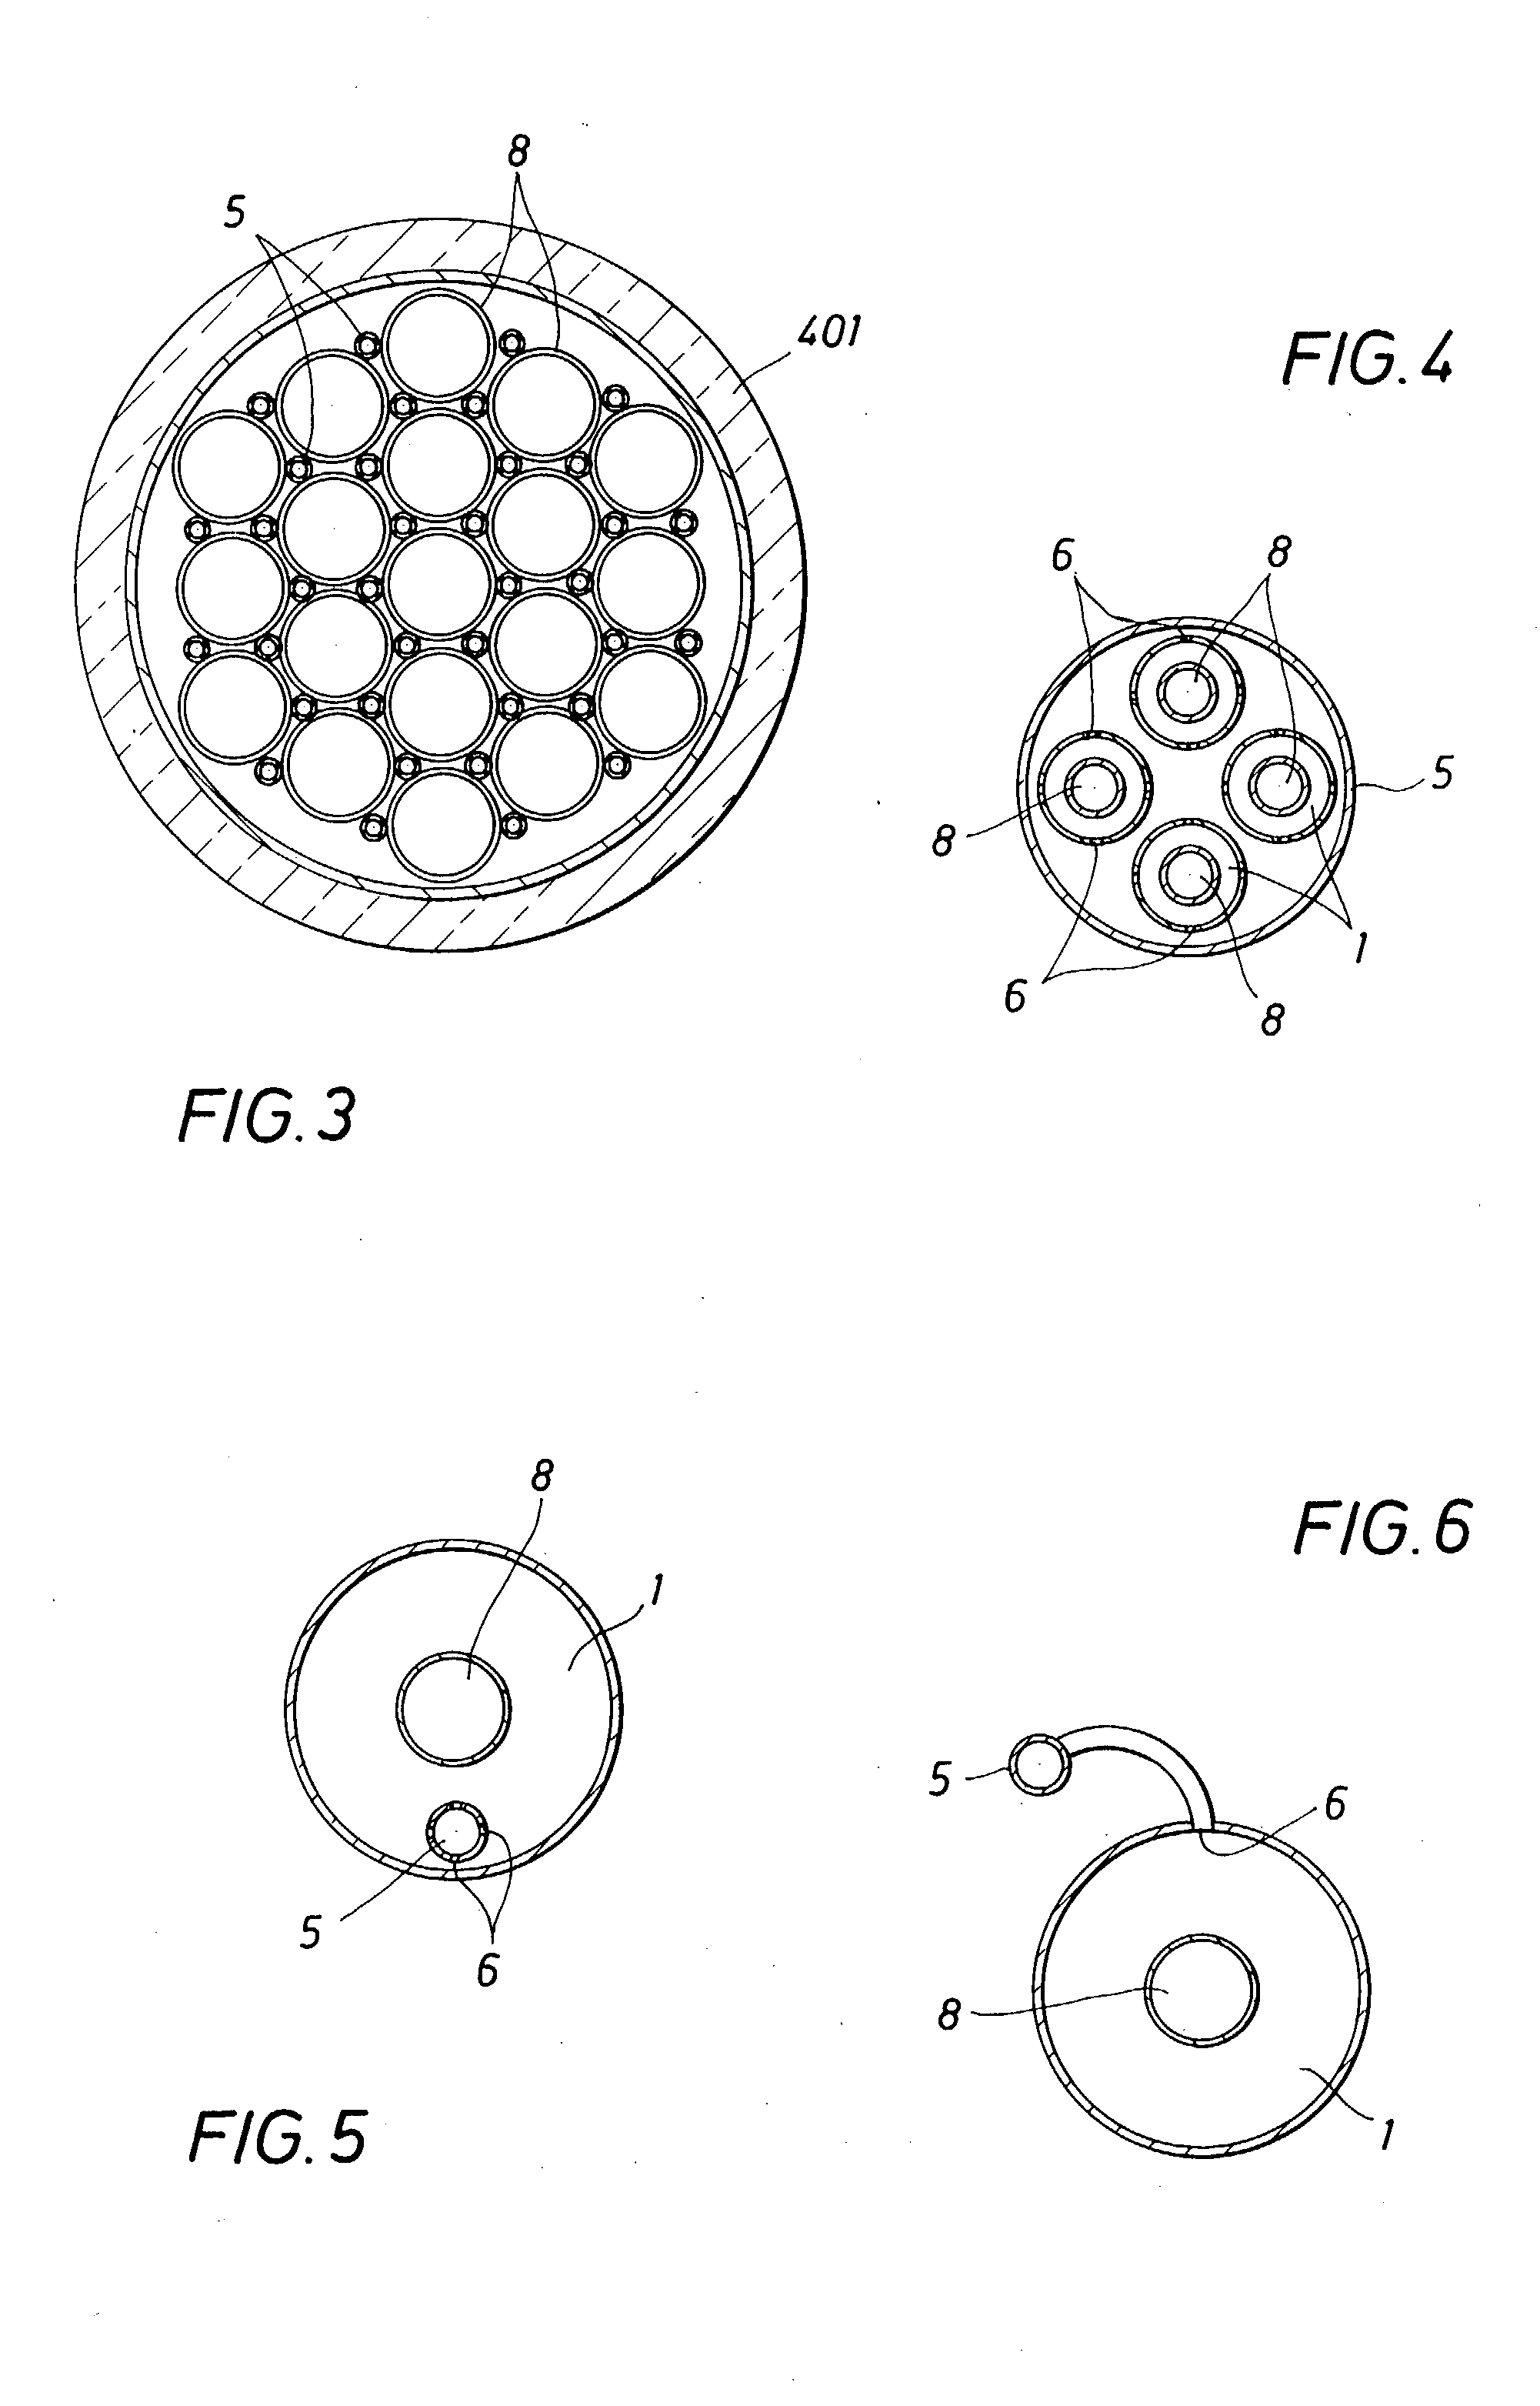 Method for providing controlled heat to a process